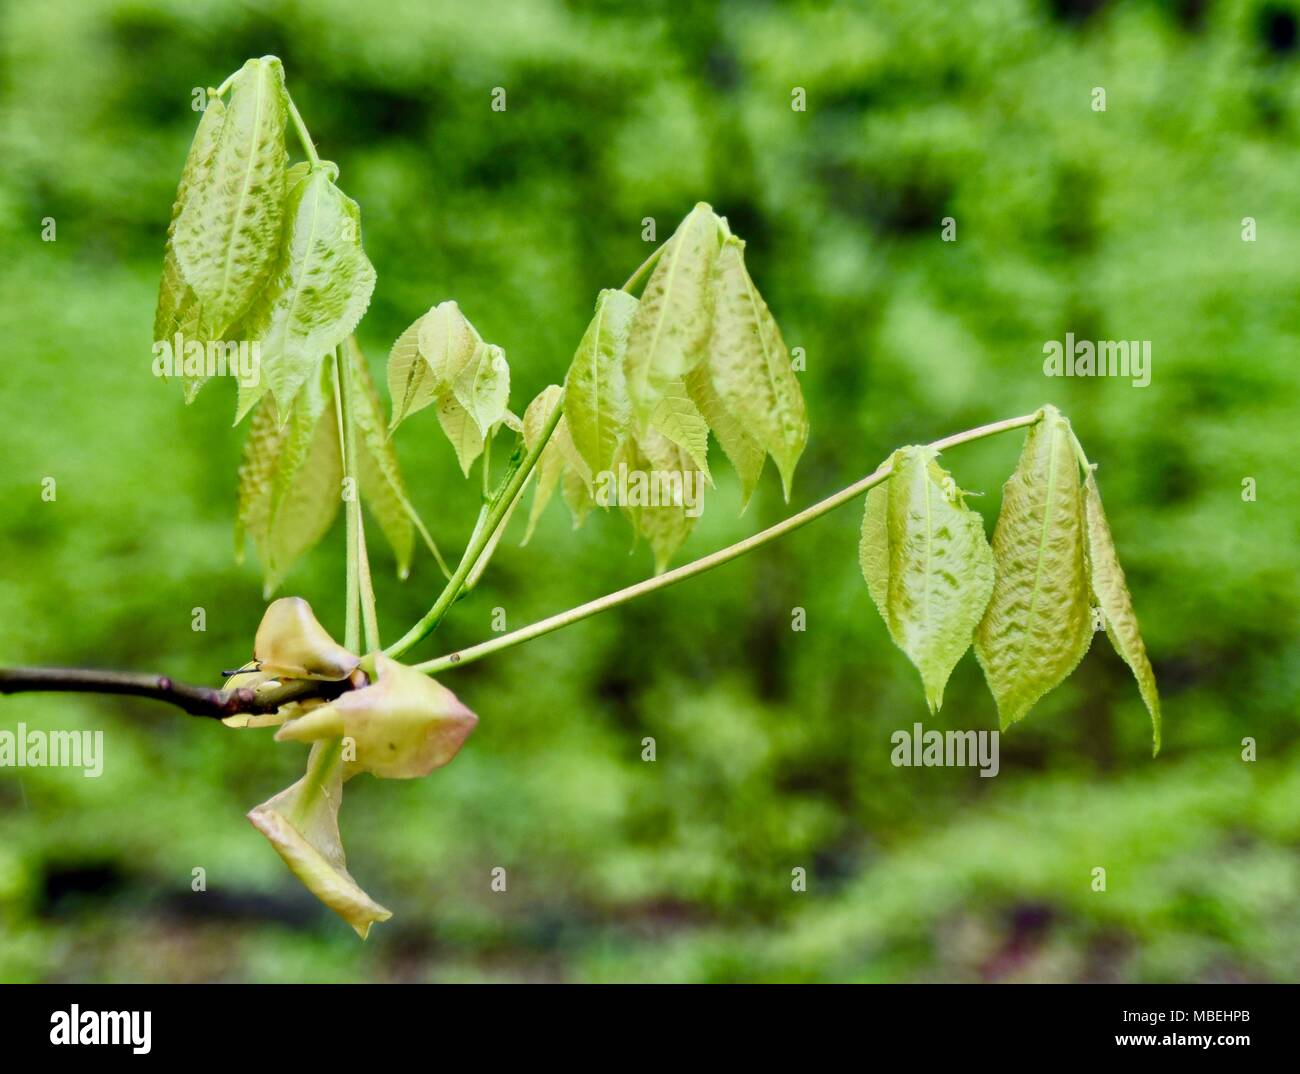 Emerging green leaves of a shagbark hickory tree in spring. Stock Photo